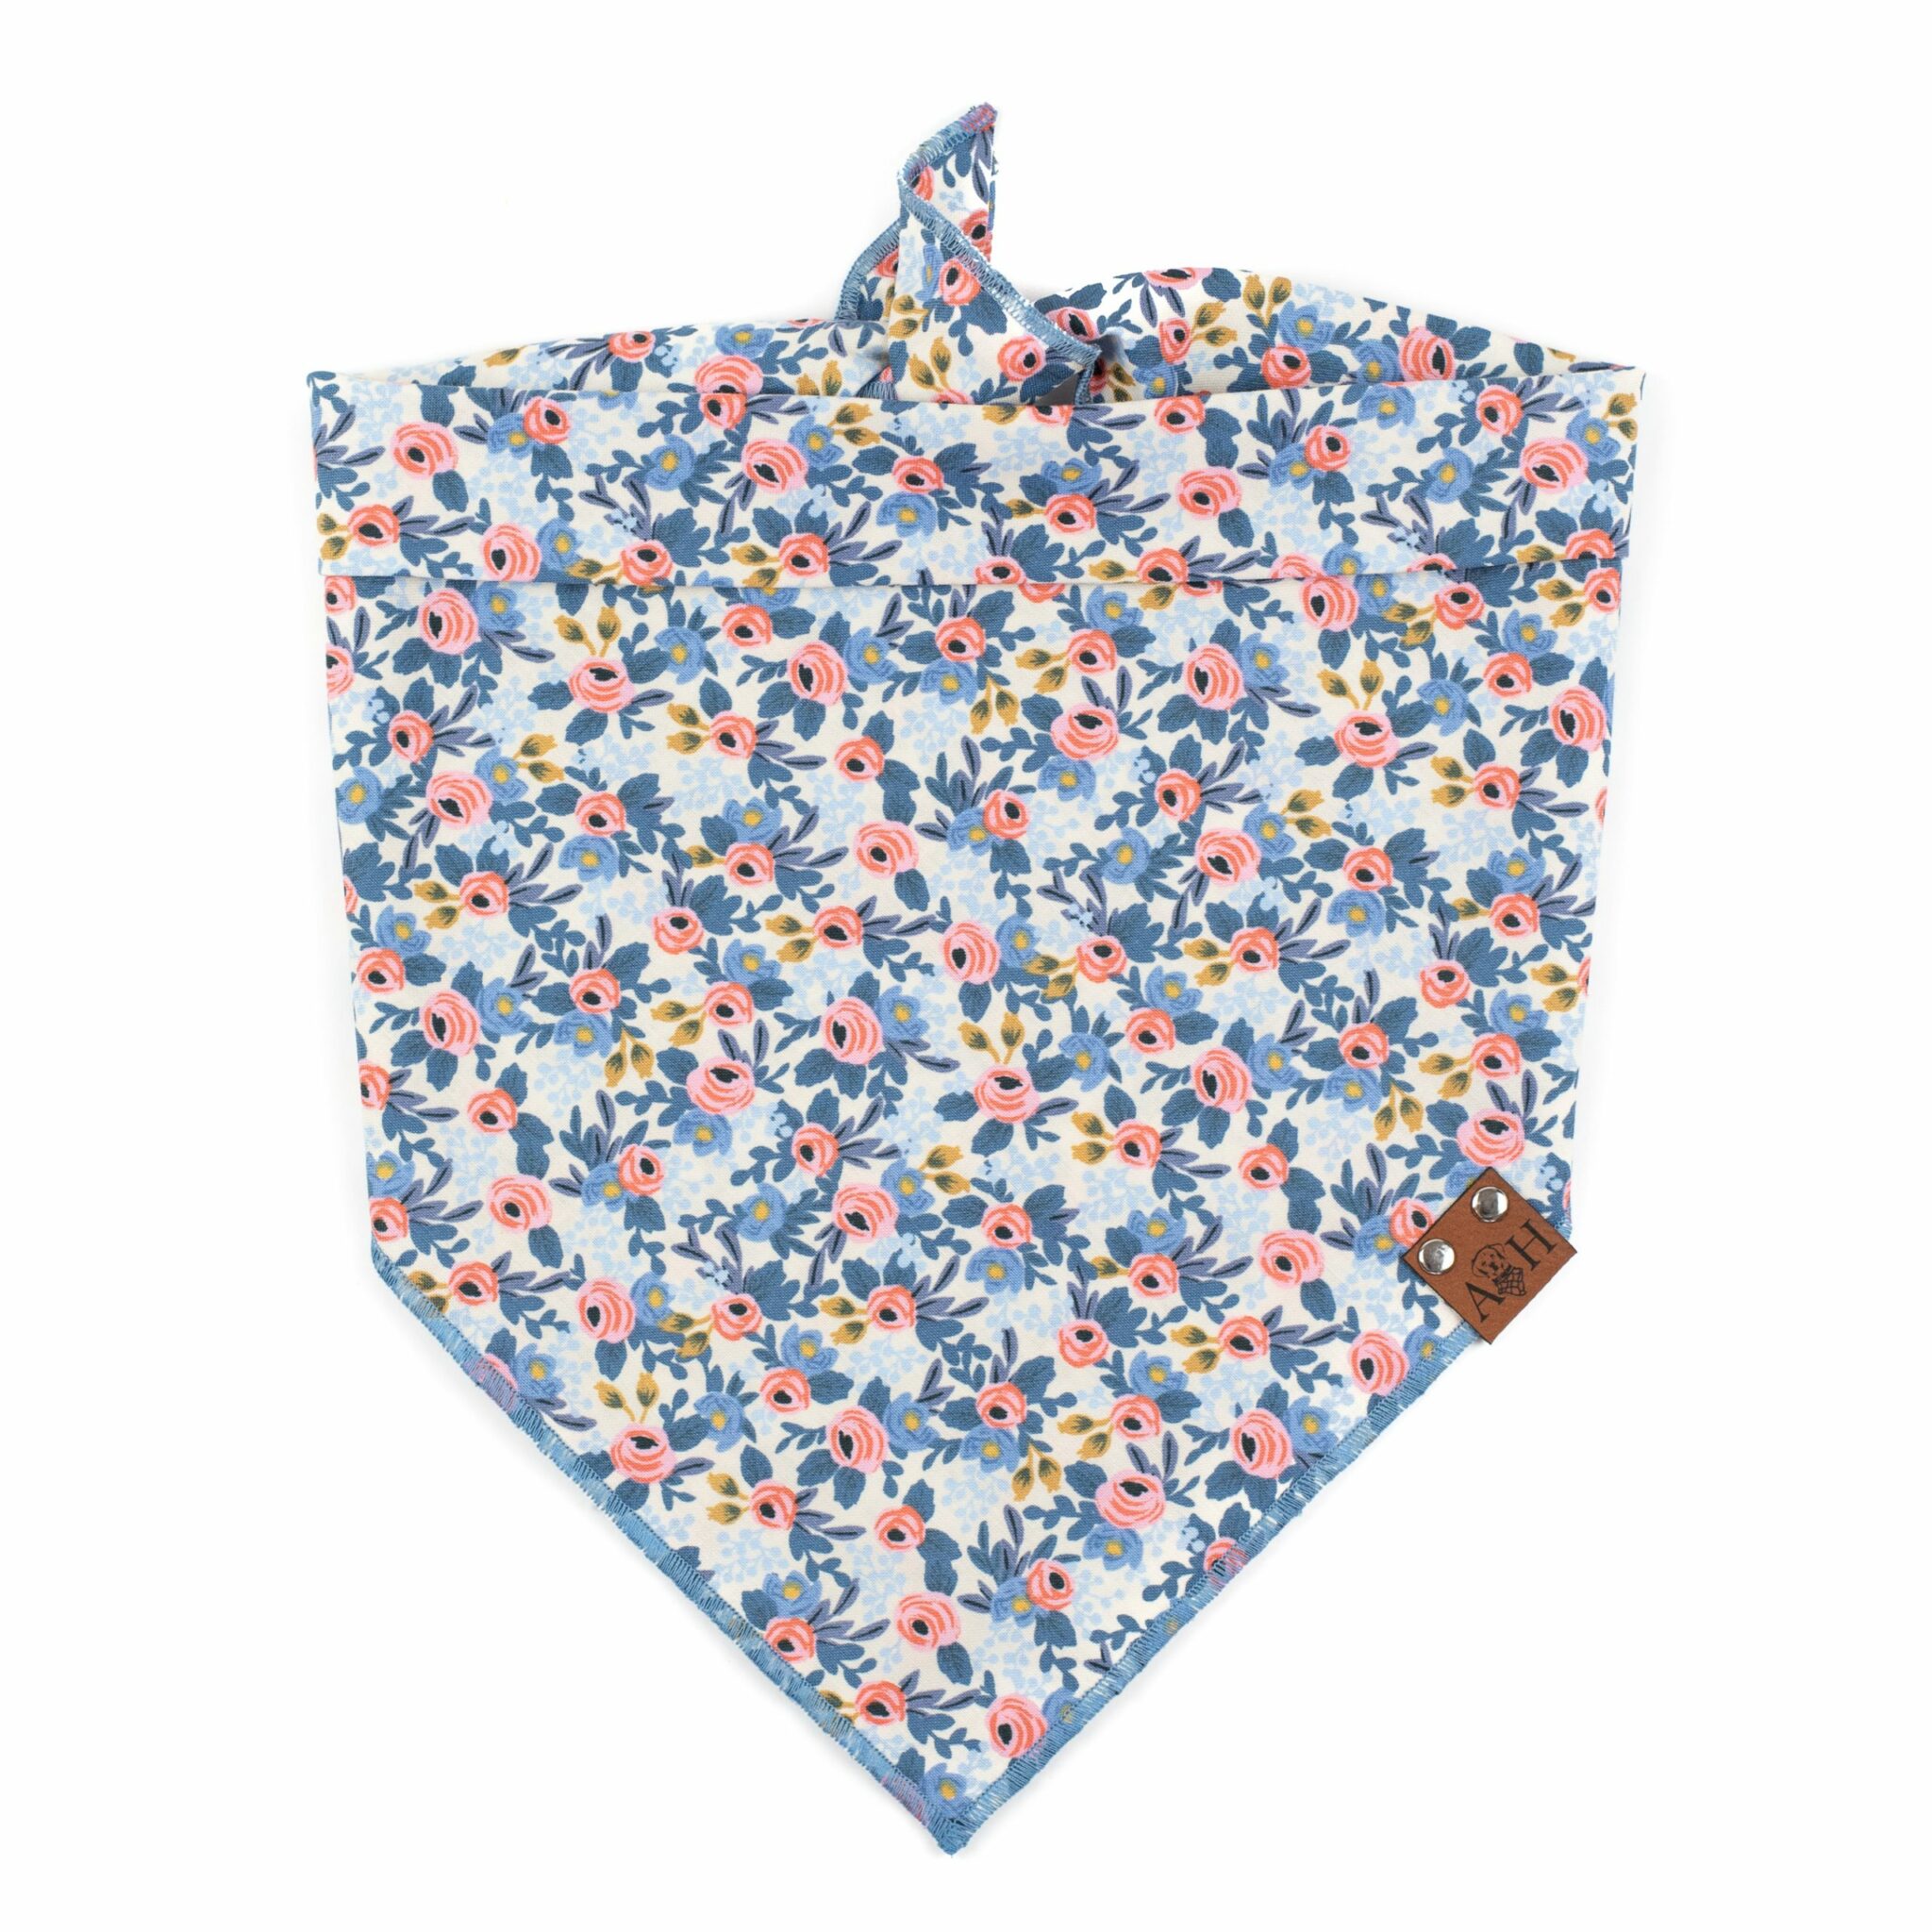 Fluer Dog Bandana with floral pattern in lavender pink and blue tones